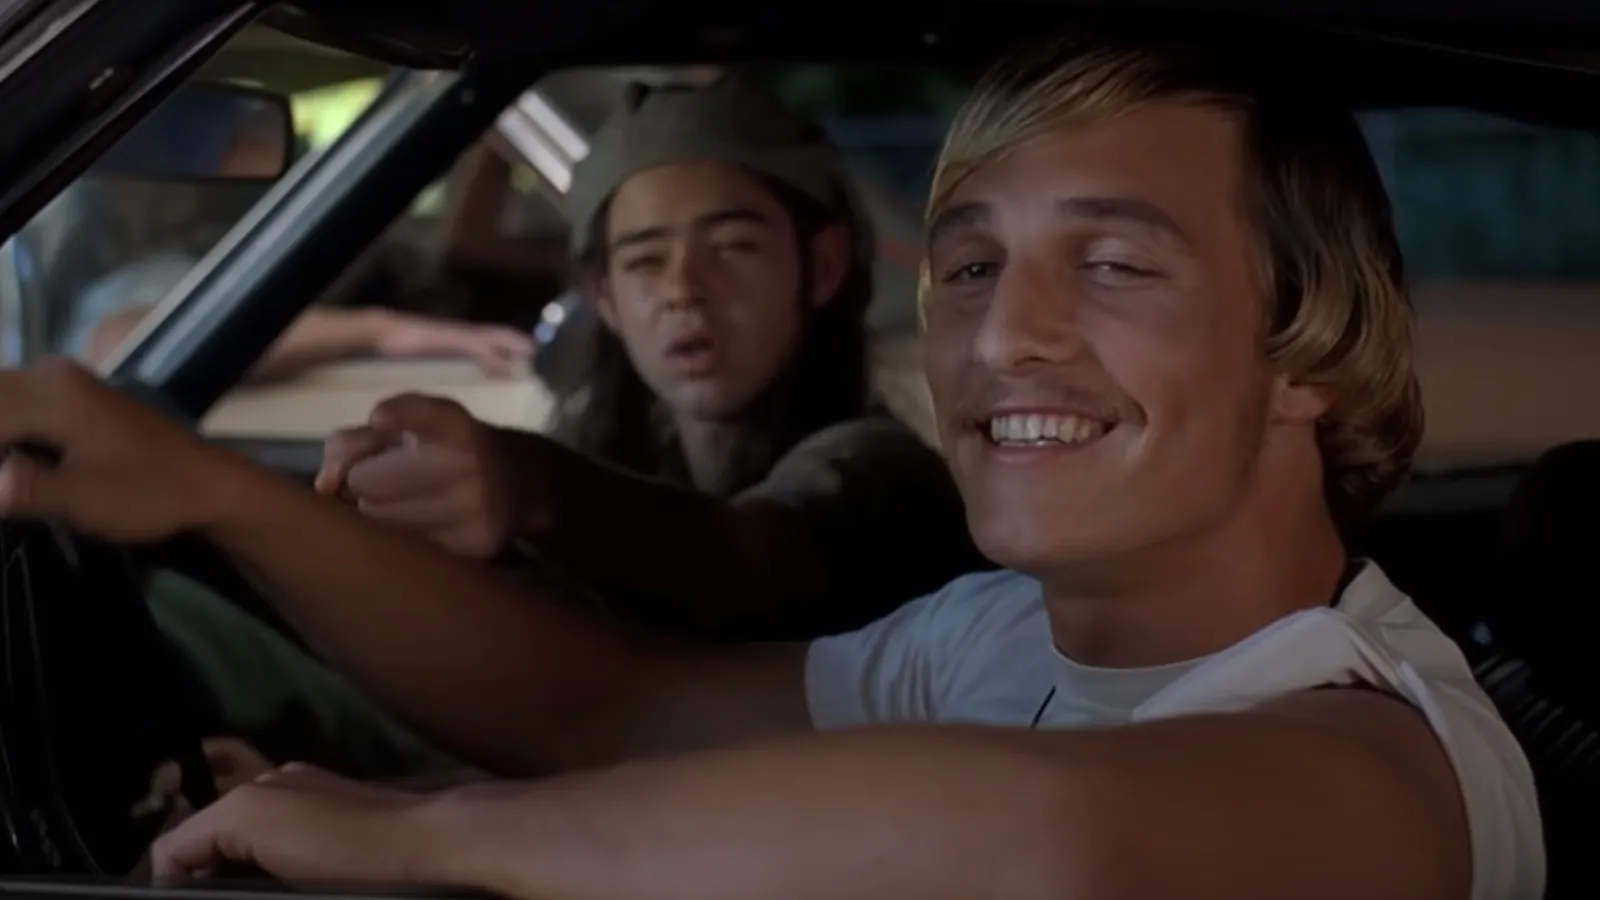 Where is the cast of ‘Dazed and Confused’ now?